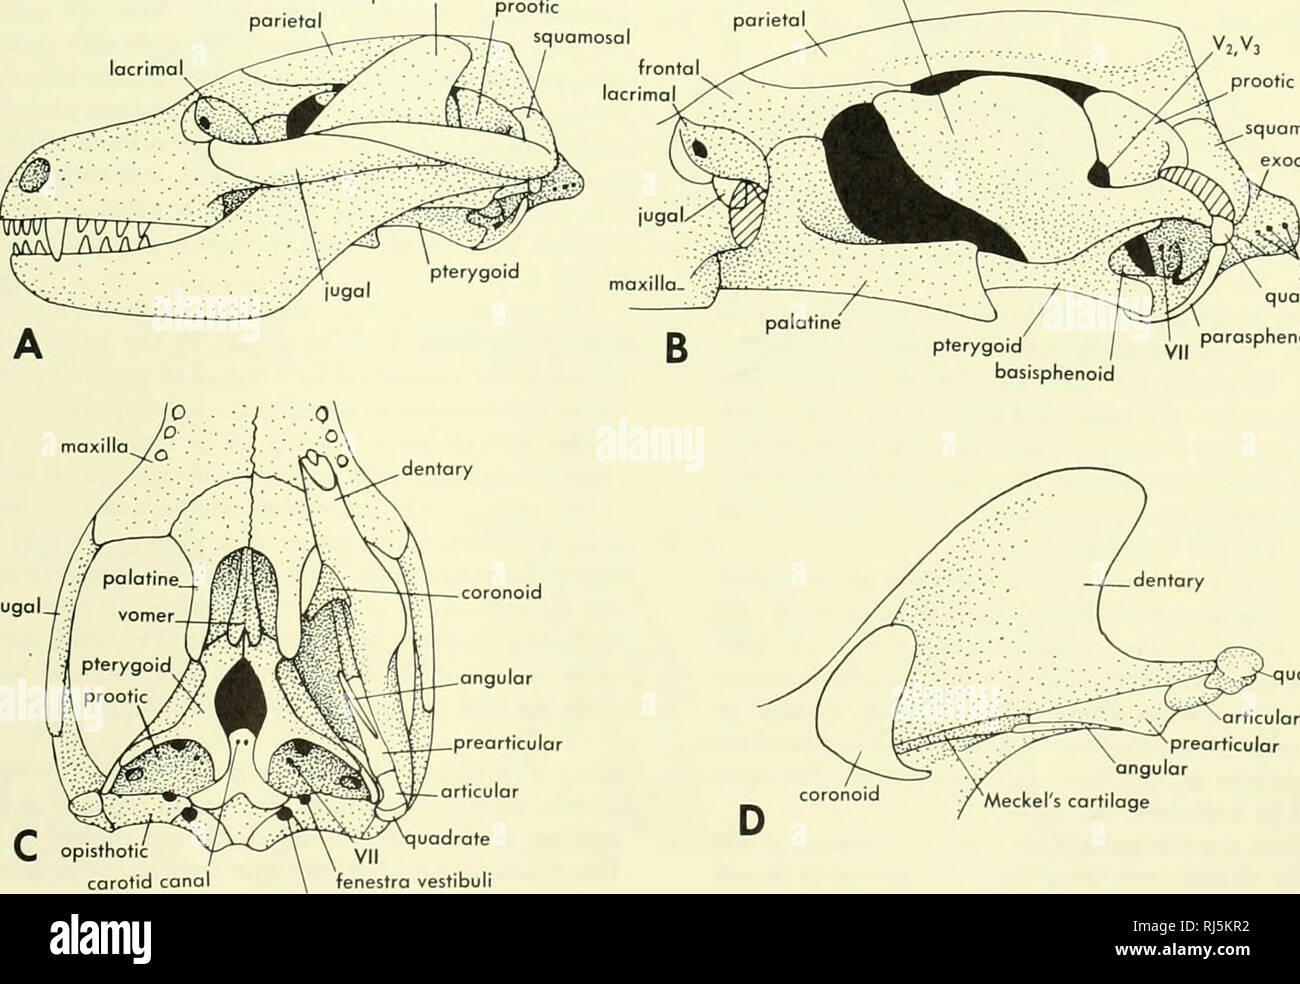 . Chordate morphology. Morphology (Animals); Chordata. Figure 4-15. Skull and mandible of Archoeopteryx. (After Heilmonn, 1927, and Kleinschmidt, 1951) lacrimal jugal coronoid process parietal alisphenoid (epipterygoid) y2,V3 prootic parasphenoid. squamosal exoccipital XII quadrate uadrate opisthotic carotid canal VII fenestra vestibuli jugular foramen Figure 4-16. Skull and mandible of Diarthrognathus. A, lateral view; B, lateral view of cranium with zygomatic arch; C, palatal view; D, inner view of posterior end of mandible. (After Crompton, 19581 OTHER TETRAPODS • 79. Please note that these Stock Photo